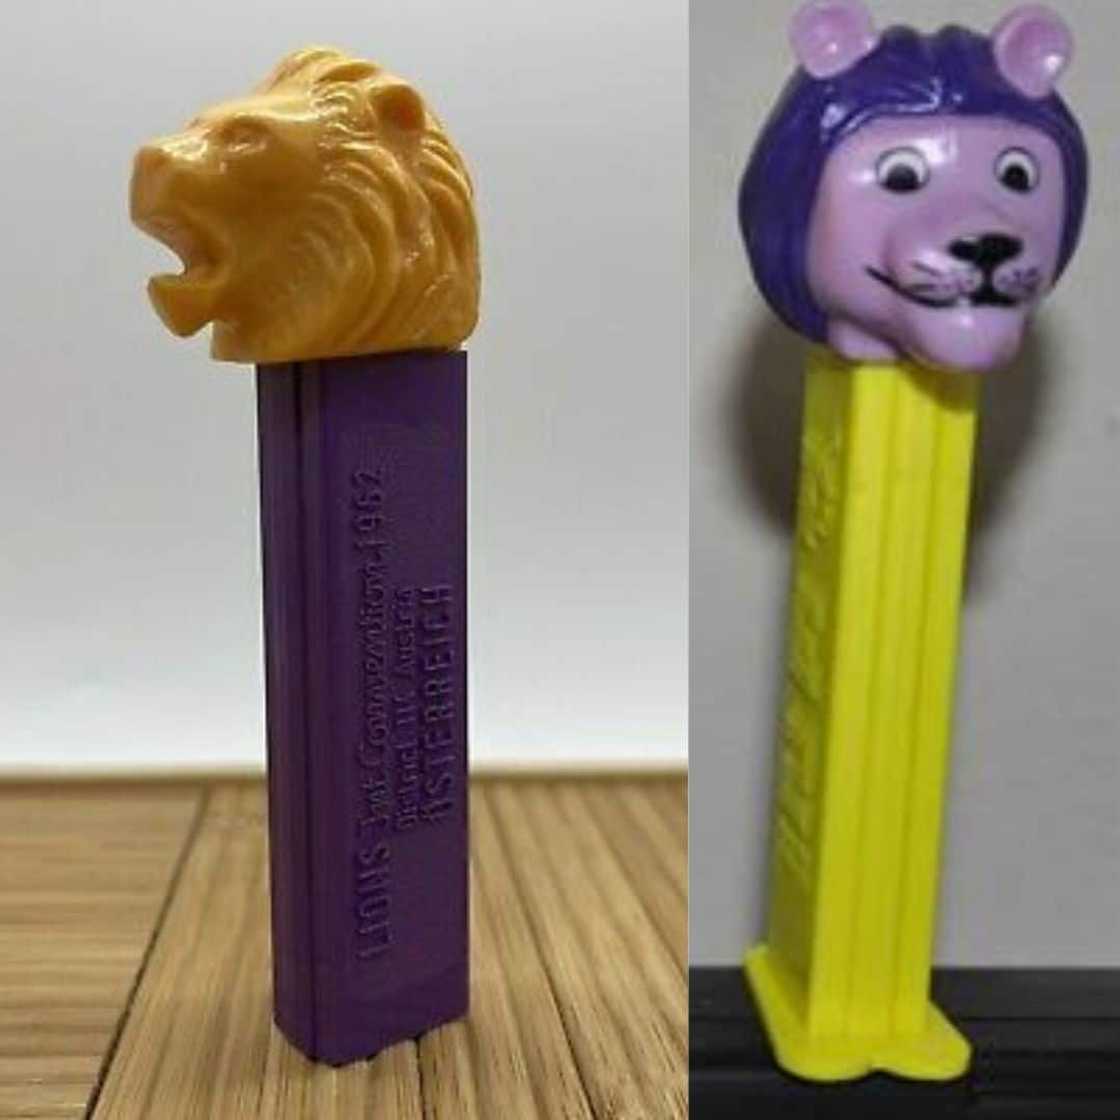 What was the first PEZ dispenser?